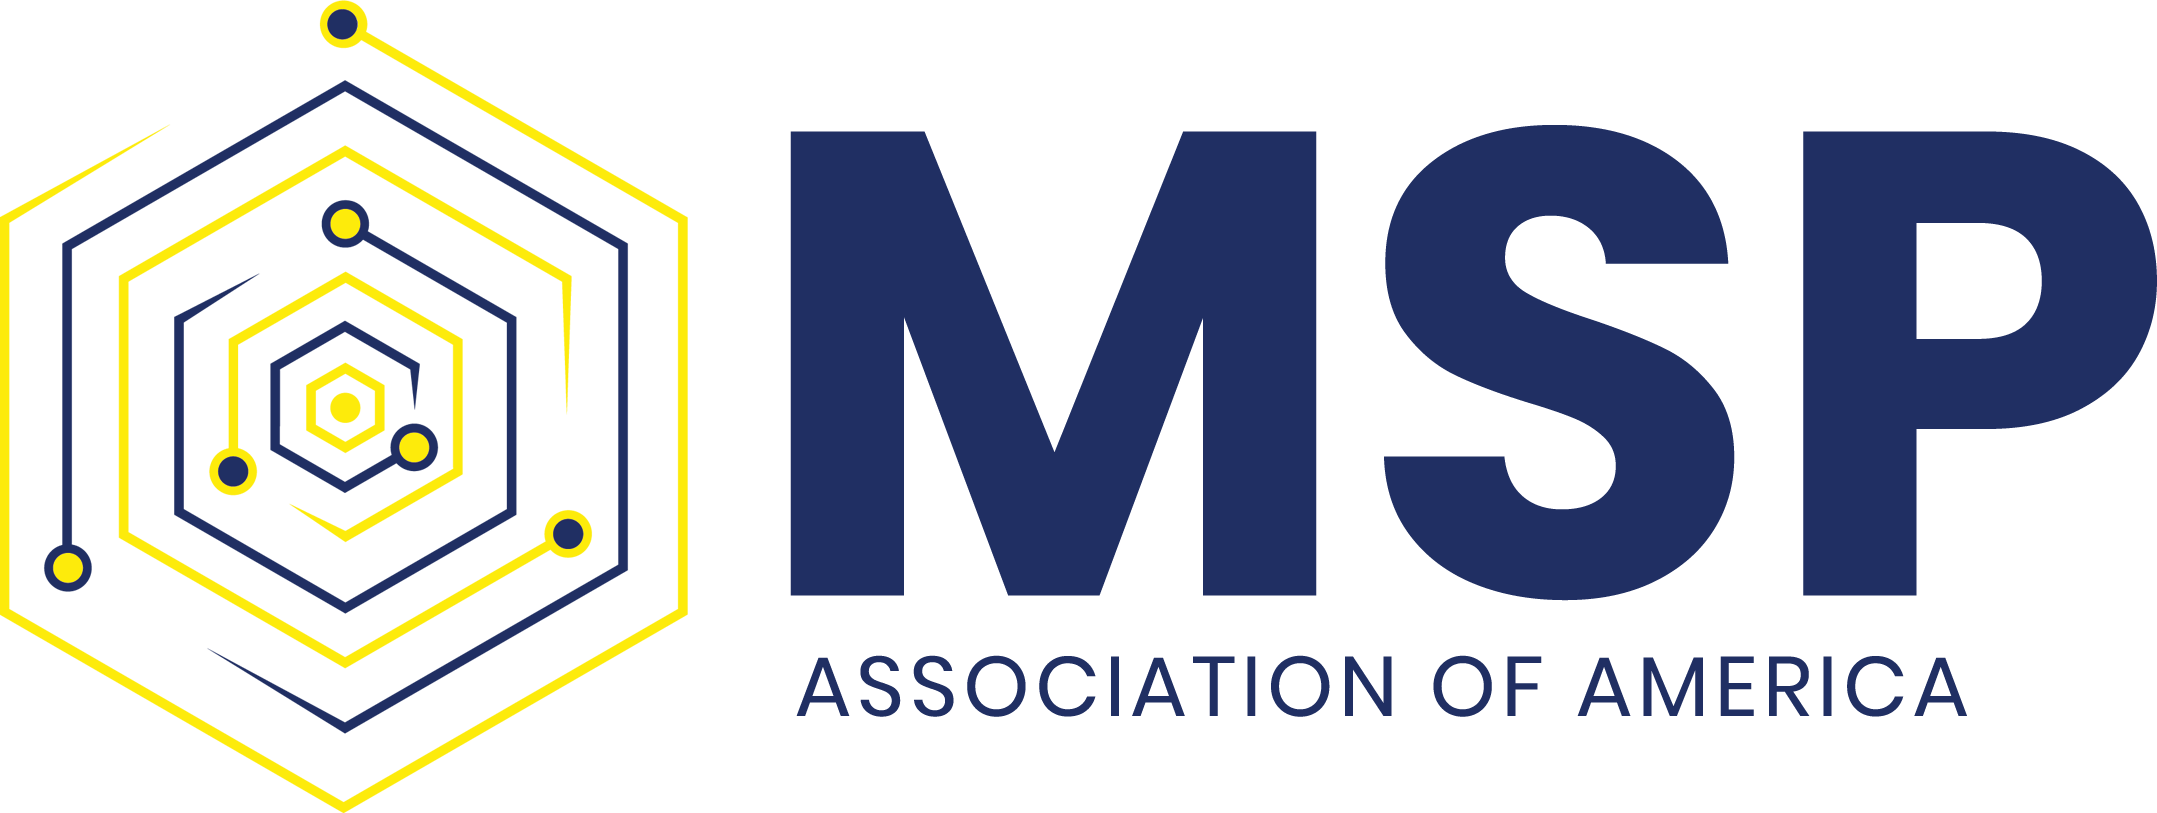 About Us | Managed Service Provider Association of America